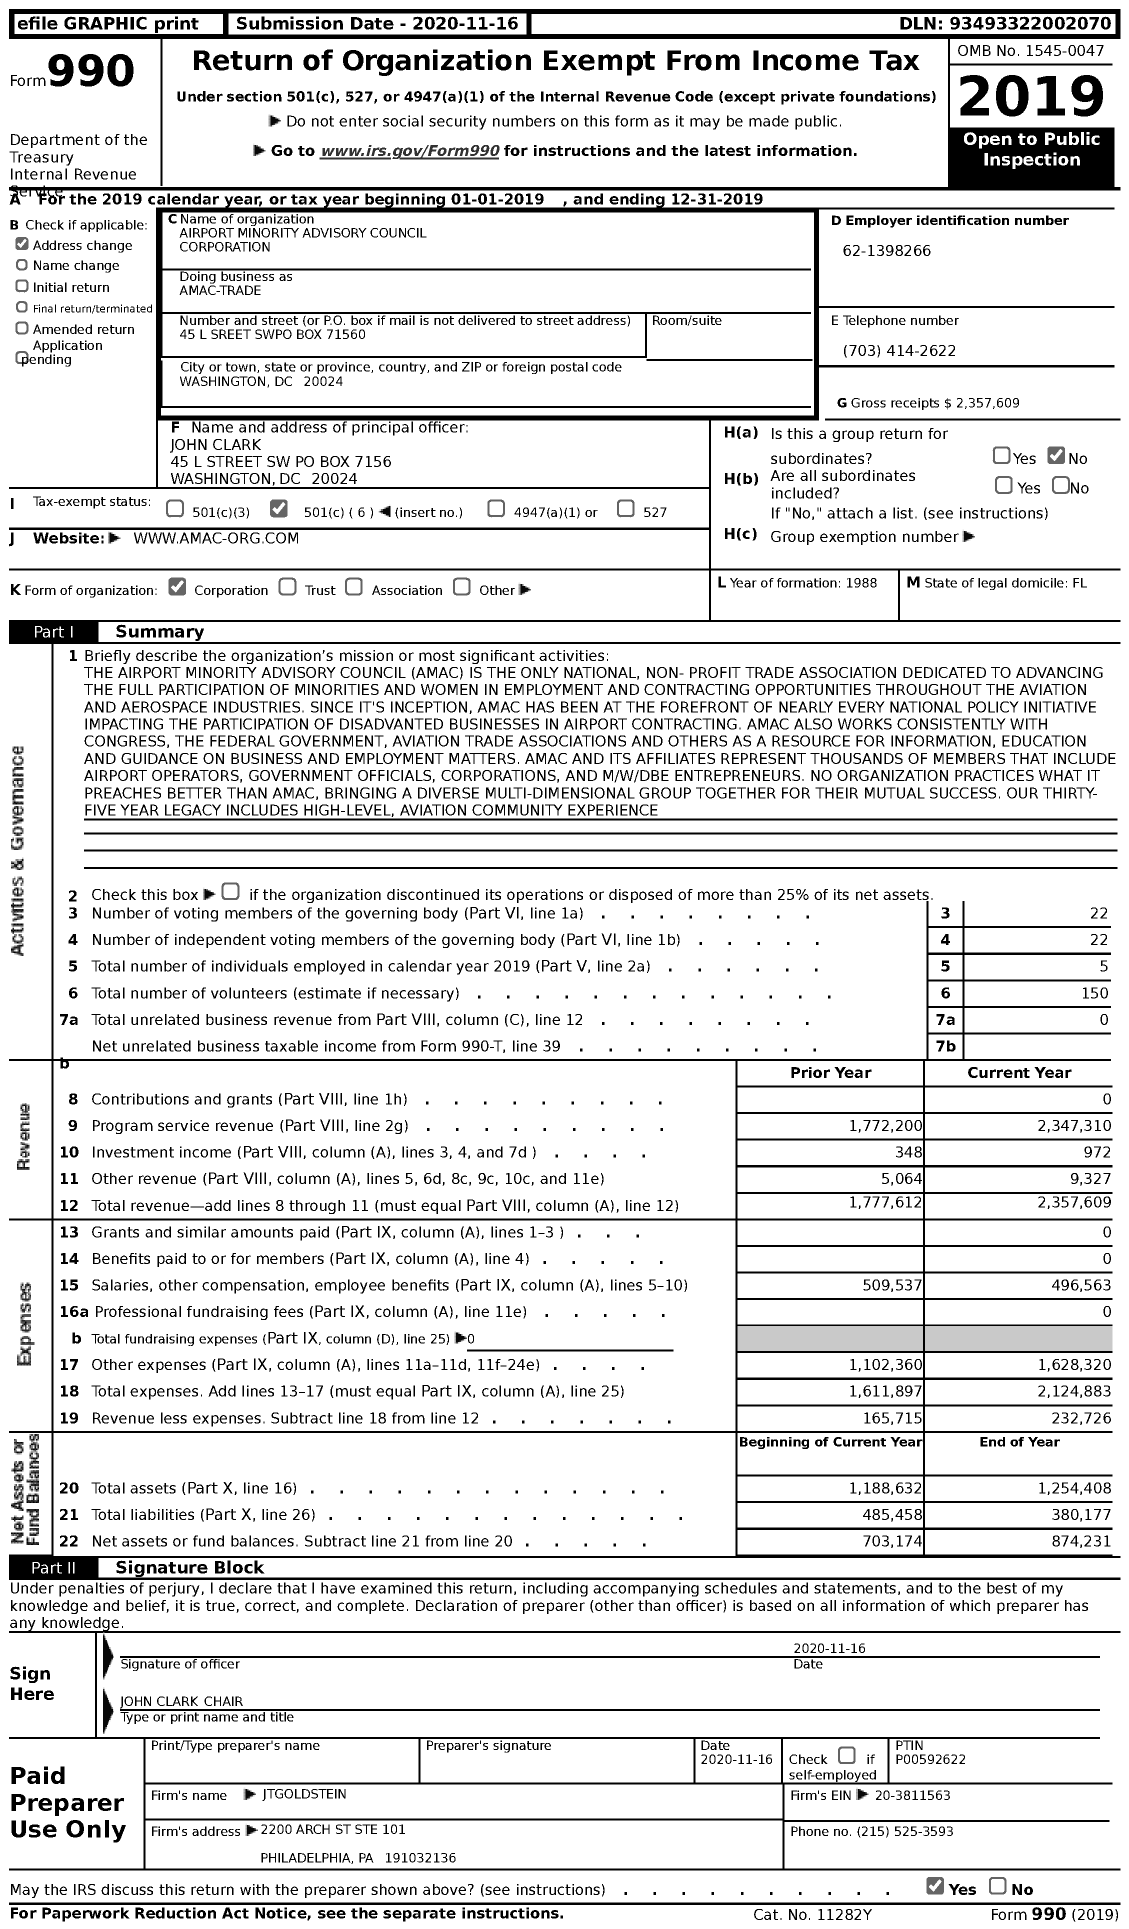 Image of first page of 2019 Form 990 for Amac-Trade (AMAC)